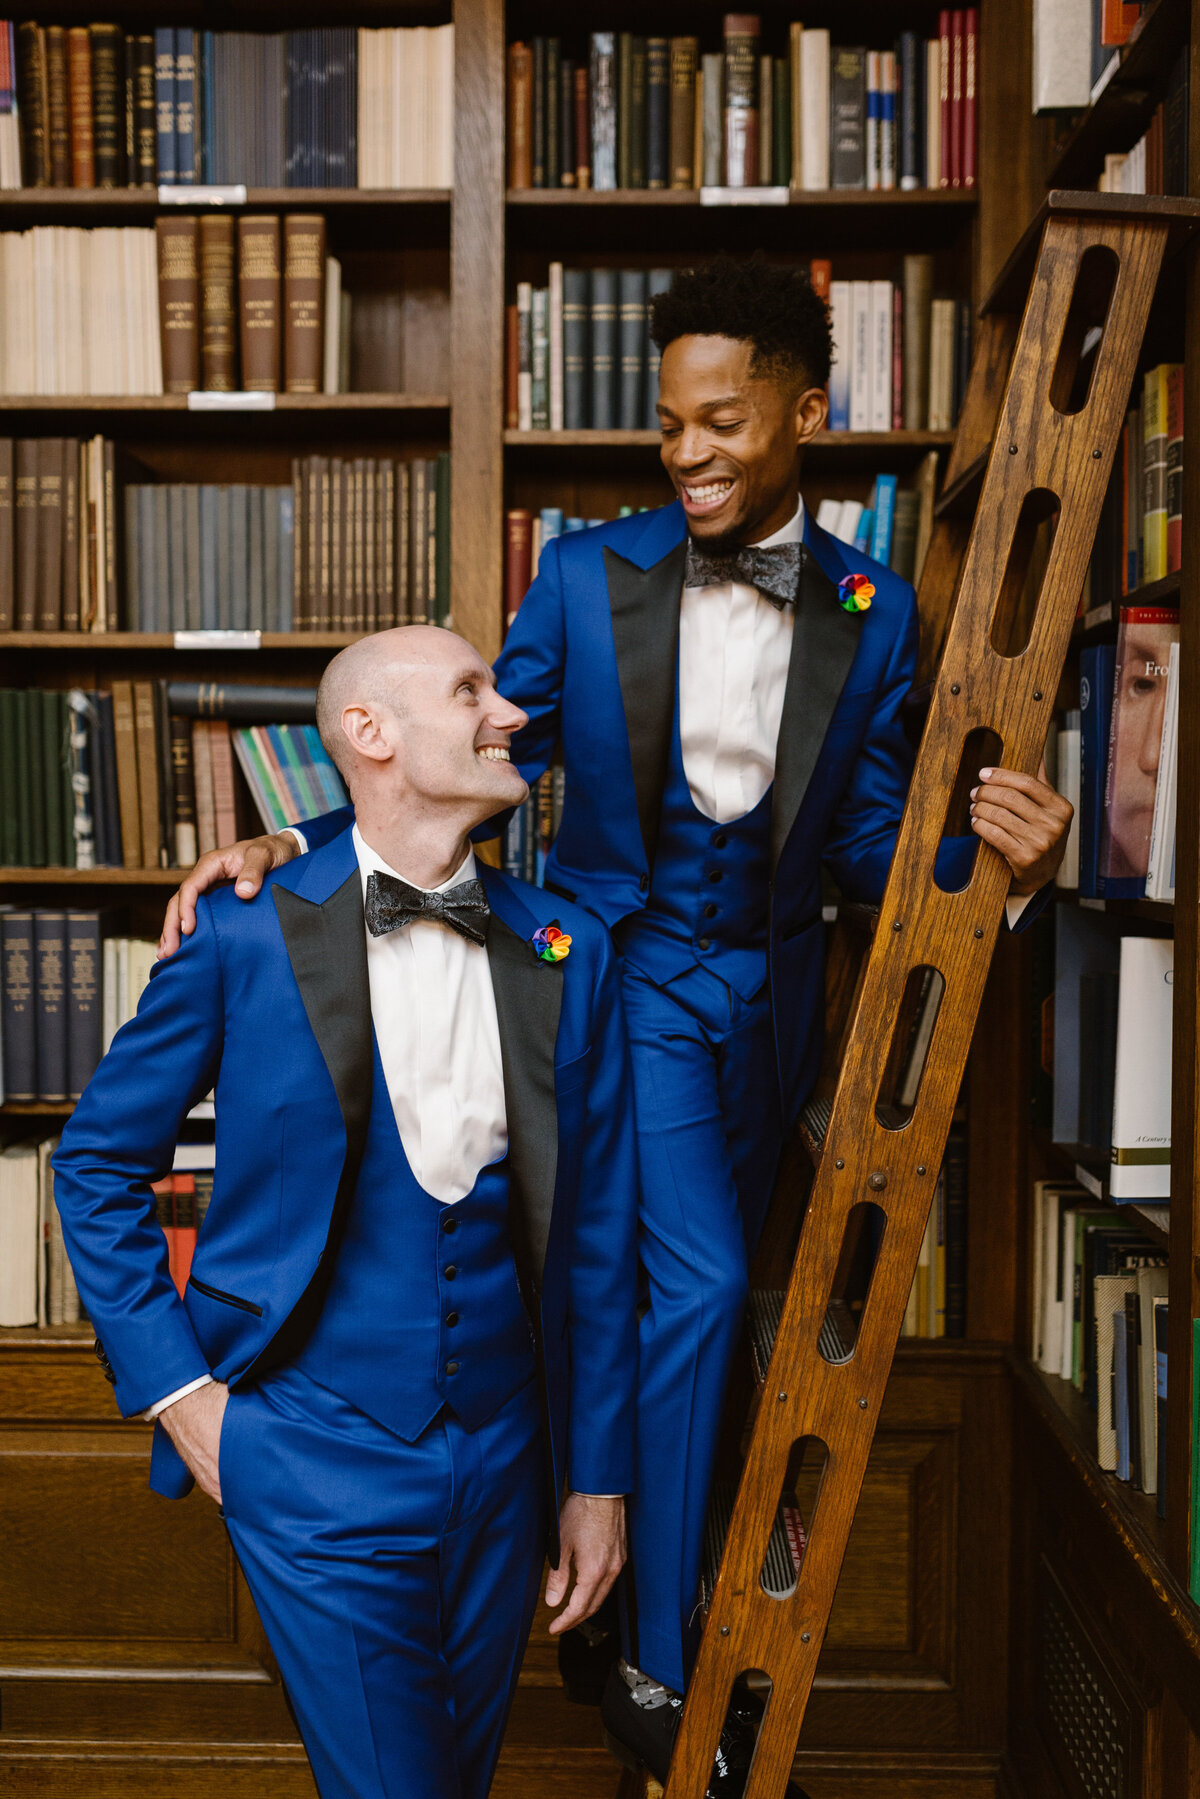 Two grooms standing next to each other while one is on a ladder.